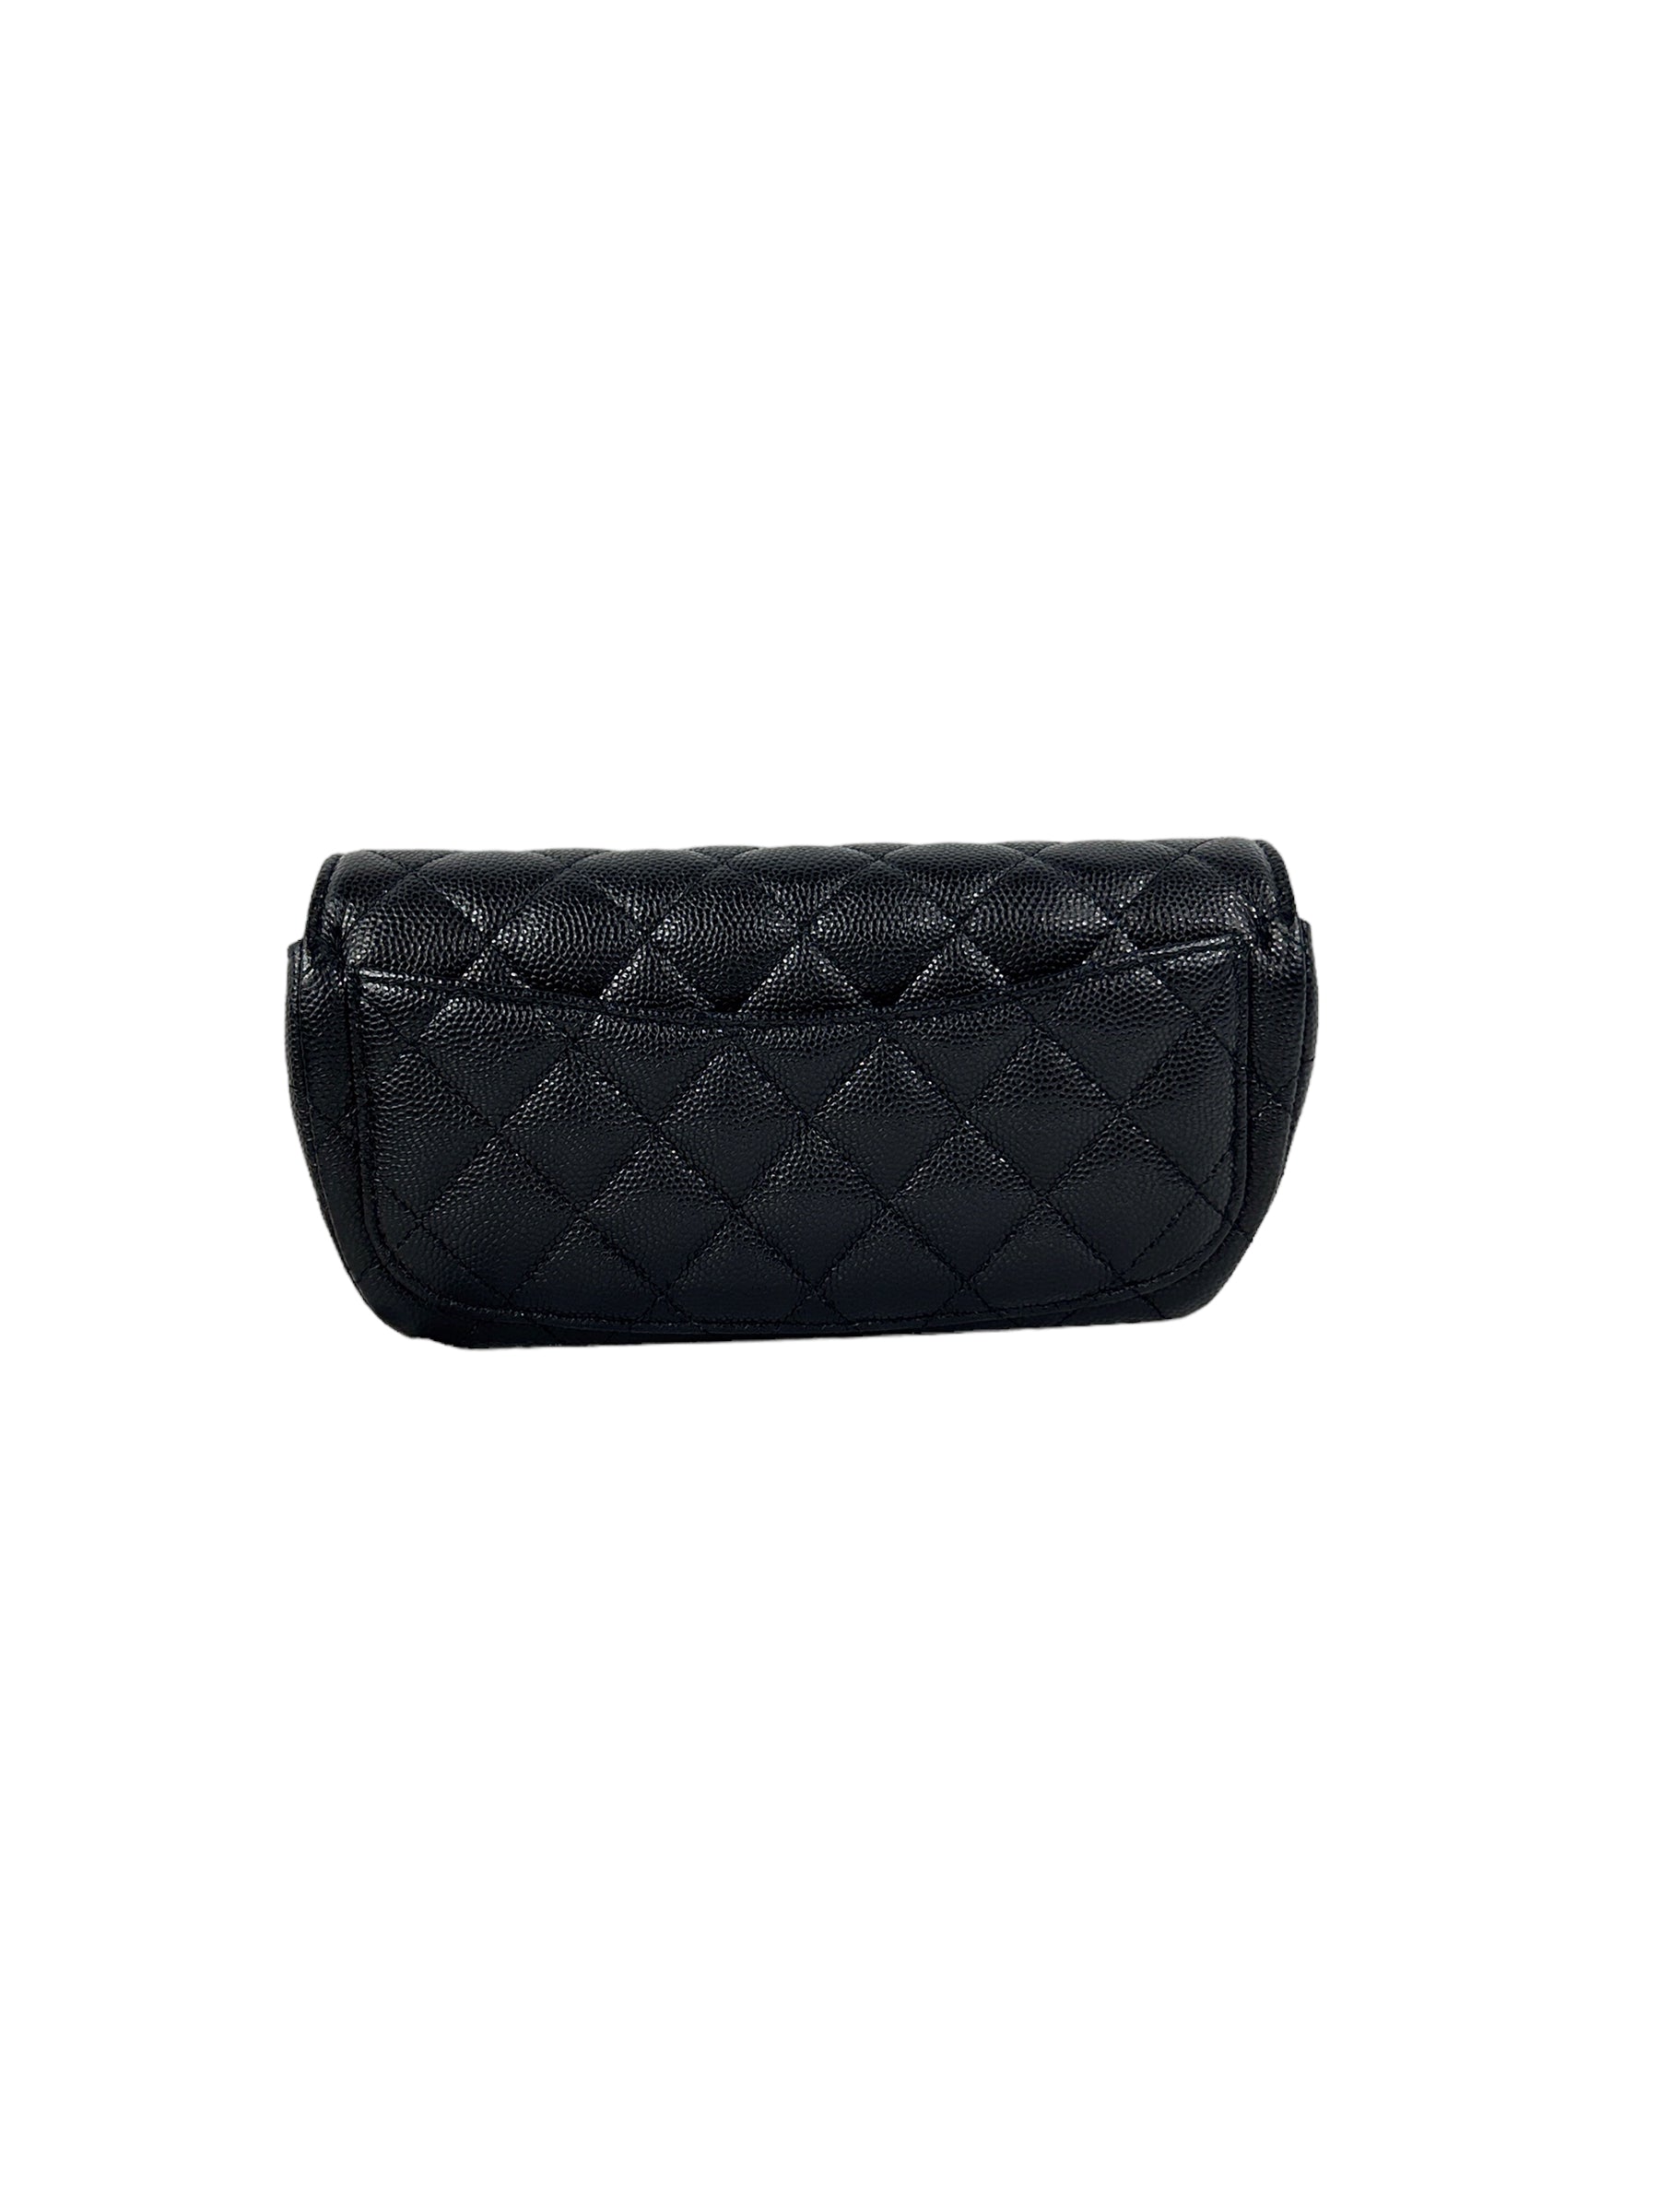 Black Caviar Quilted Sunglass Case Bag w/GHW Chain